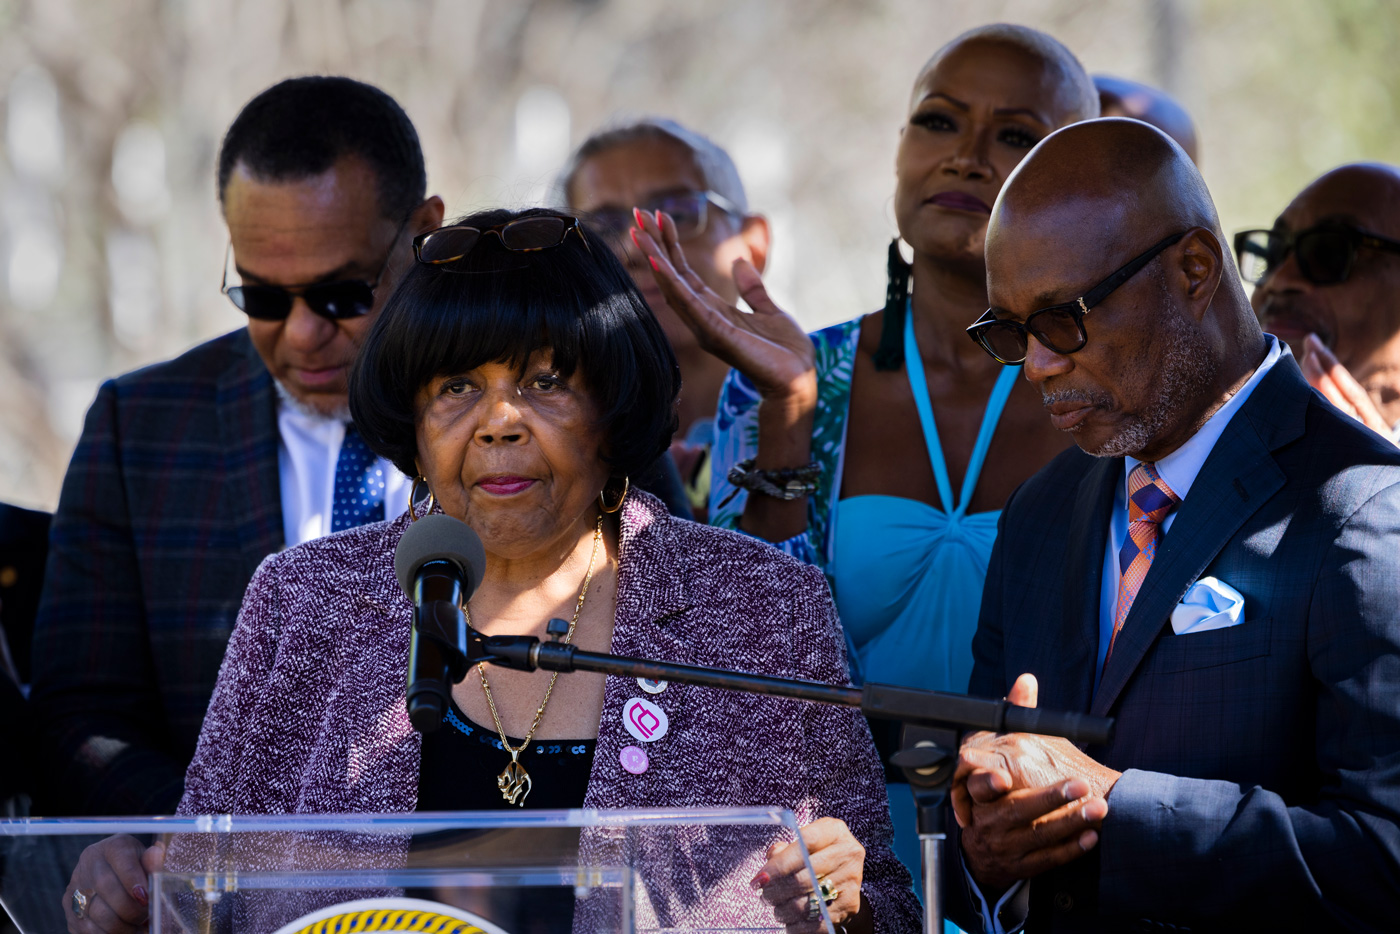 State Representative Alma Allen stands behind a podium speaking at a protest in Houston